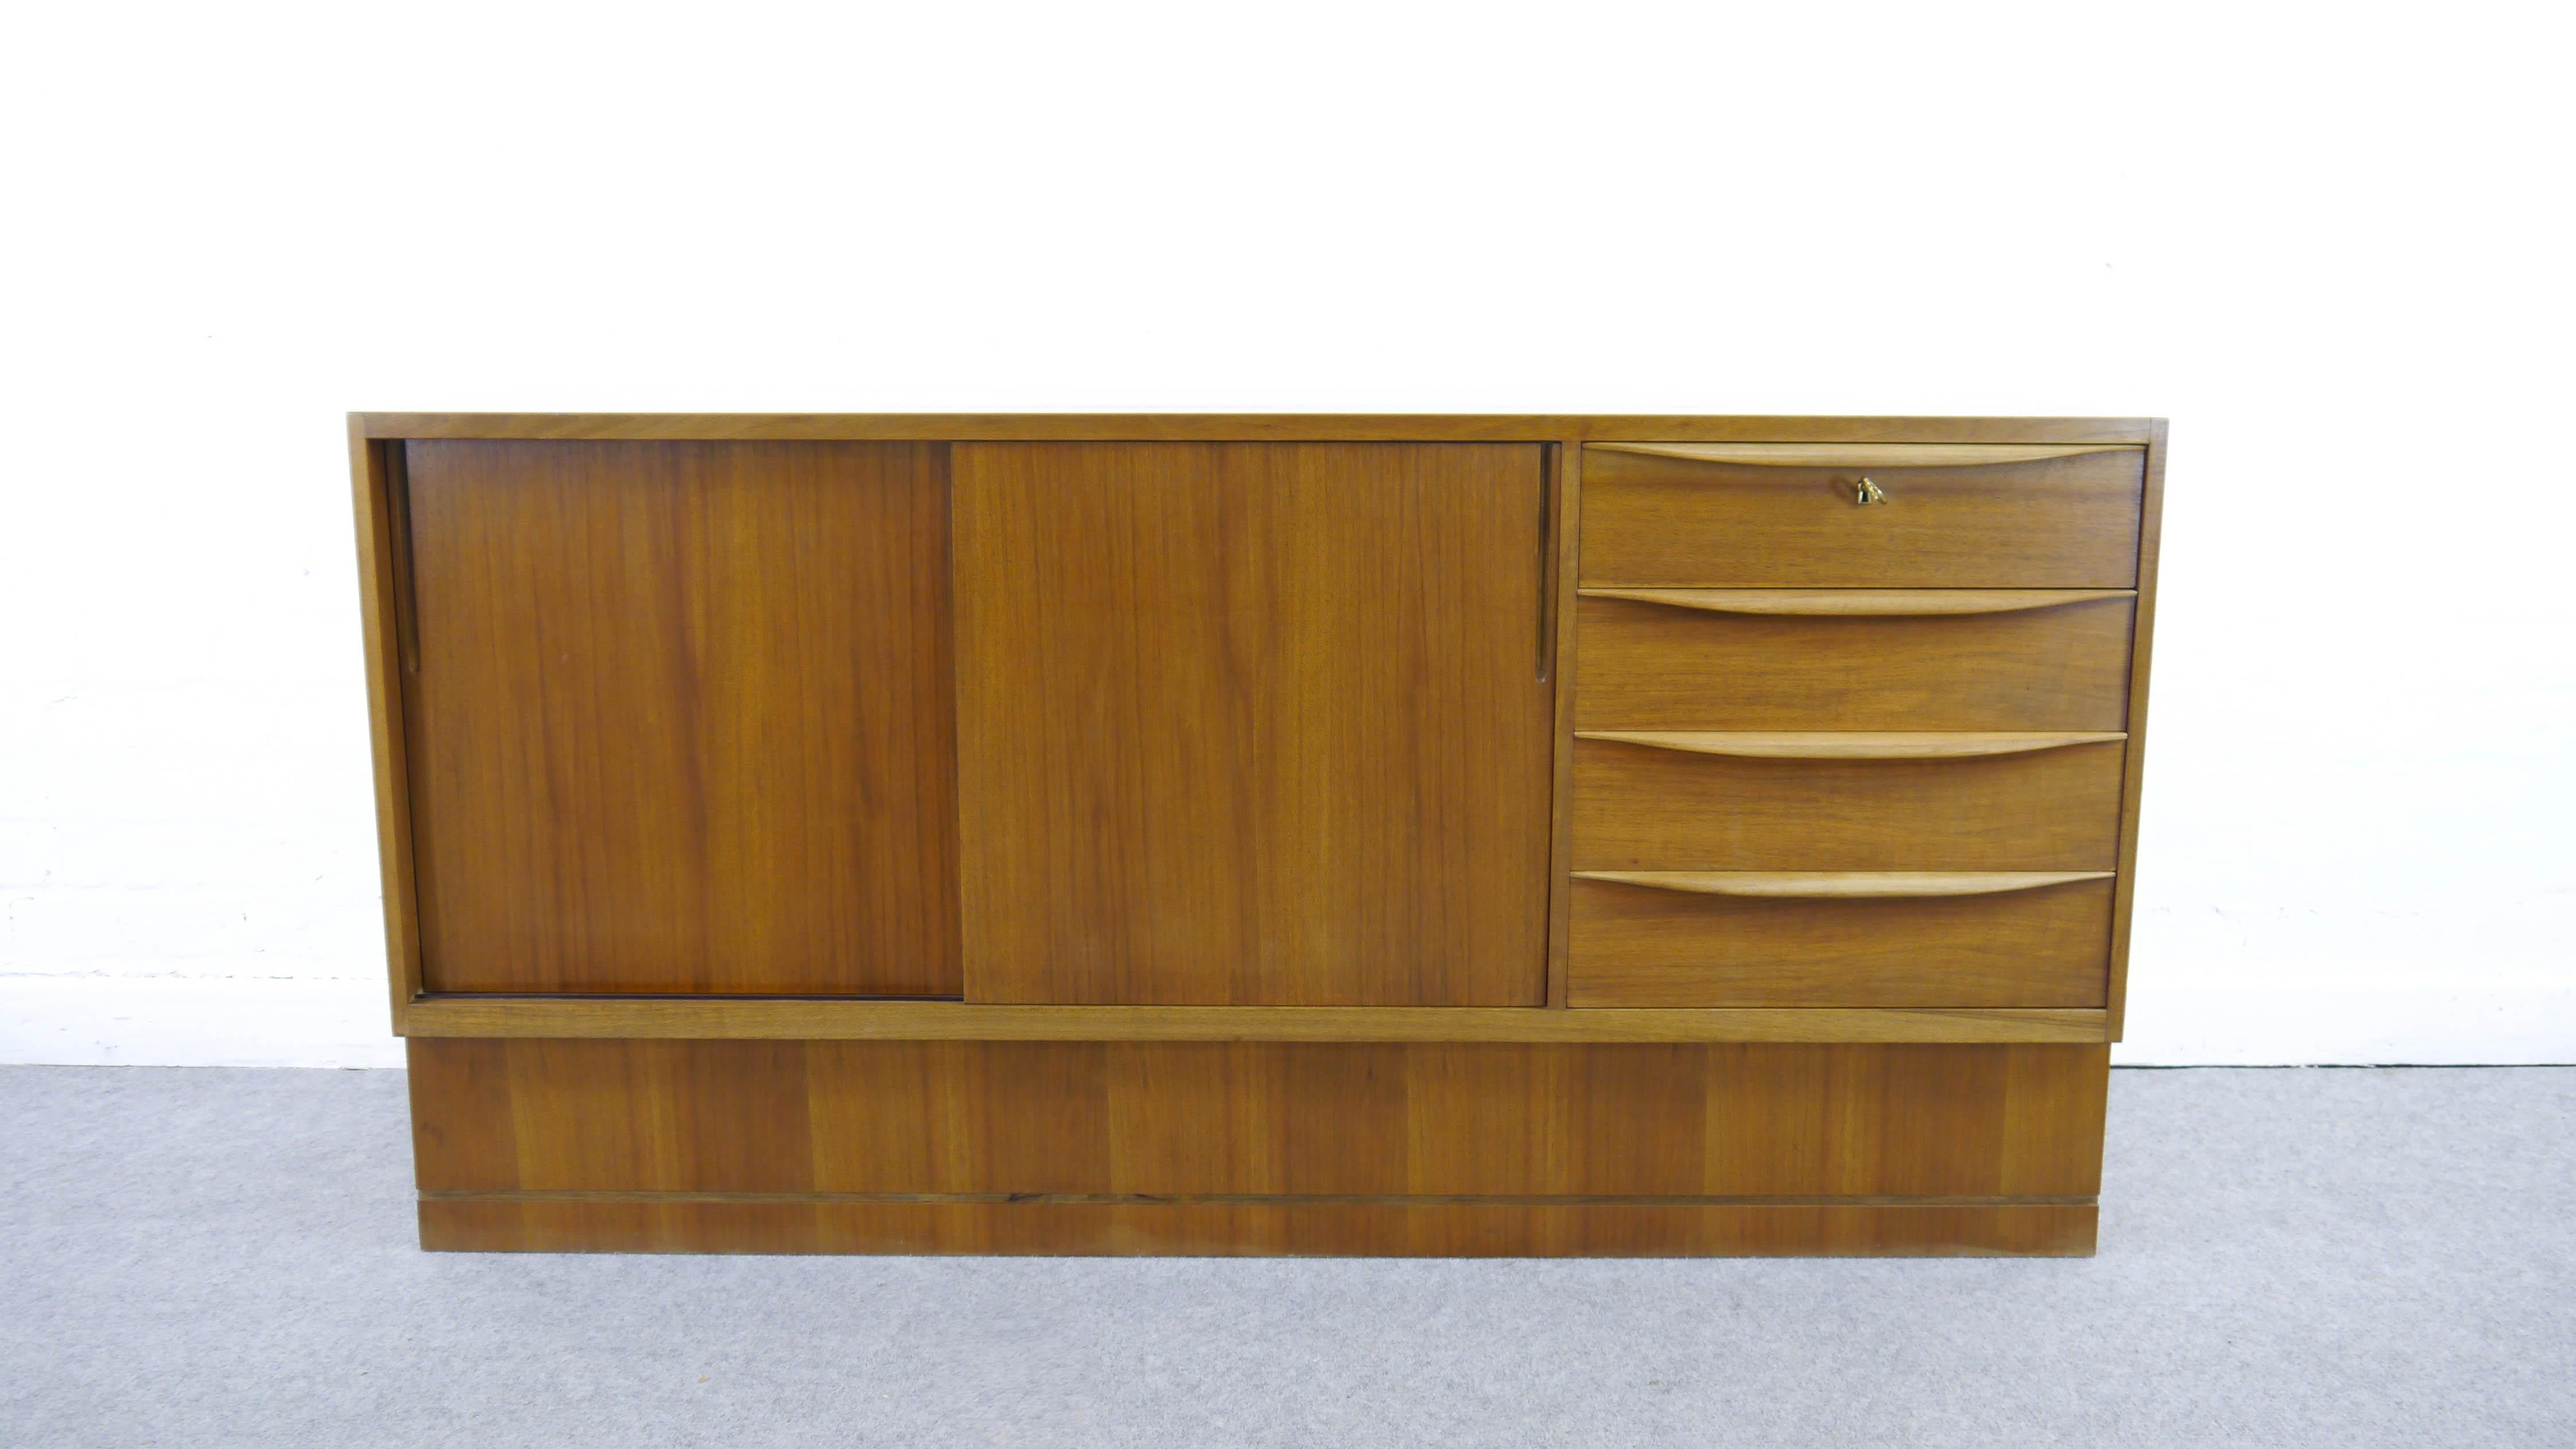 Bauhaus-pupil Franz Ehrlich designed this furniture series in the early fifties for the VEB Deutsche Werkstätten Hellerau. Midcentury sideboard with two sliding doors and 4 drawers.